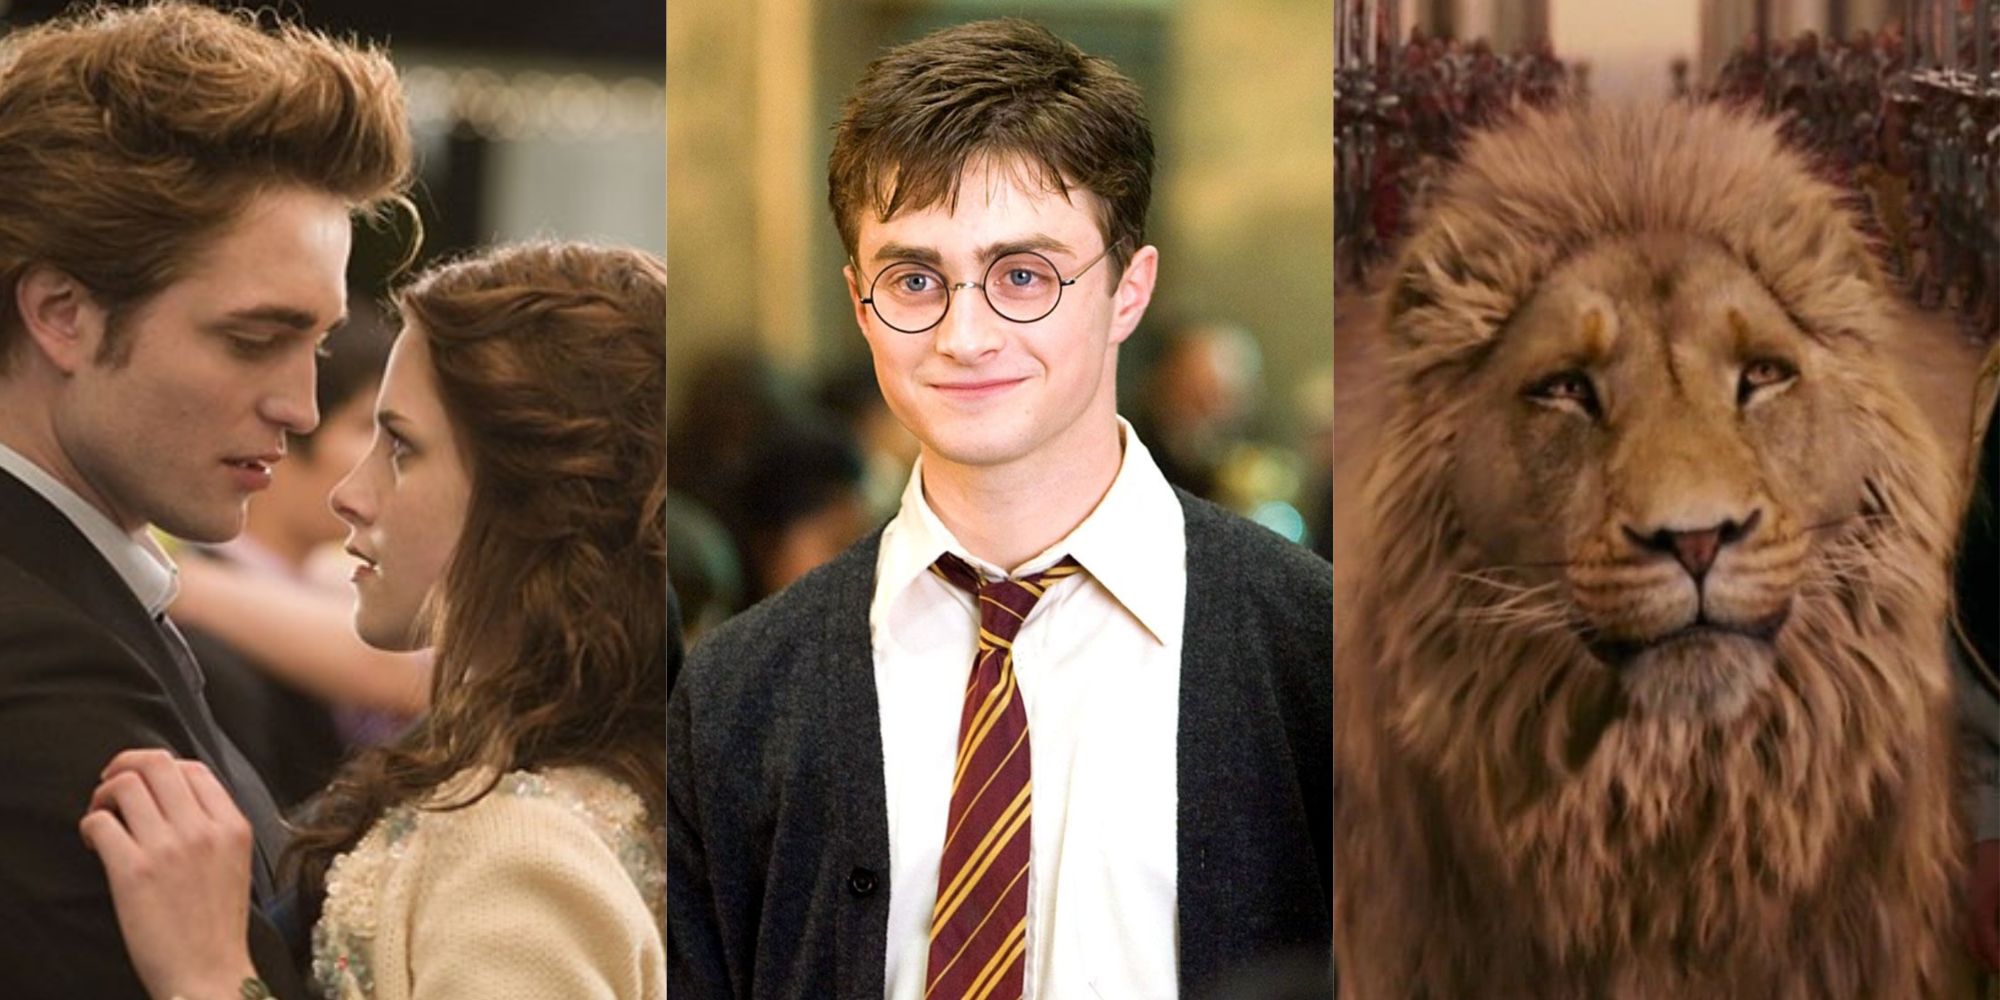 Split images of Bella and Edward in Twilight, Aslan in Harry Potter and Narnia